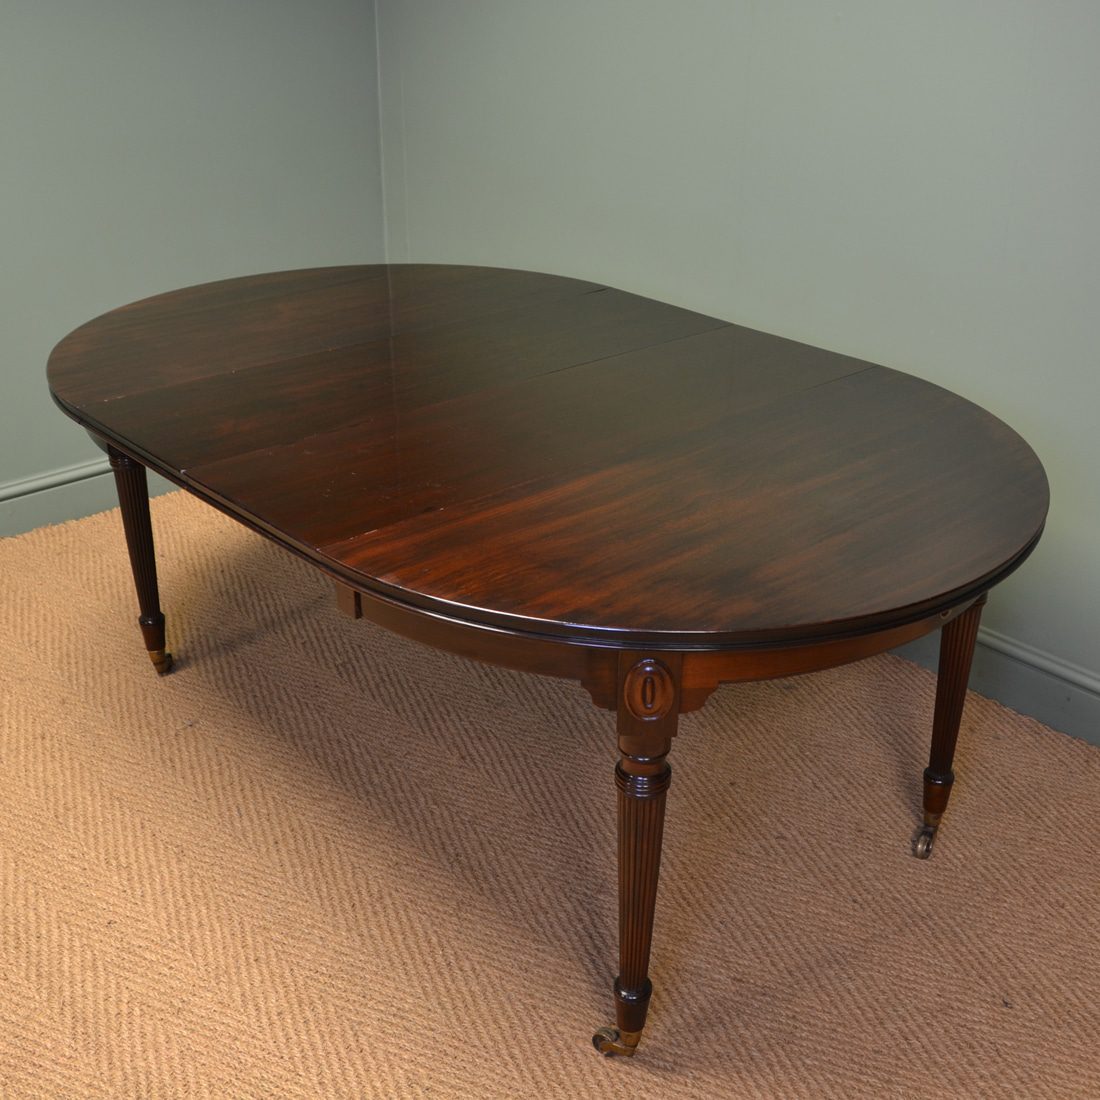 Edwardian Walnut Antique Extending Dining Table by Selbat